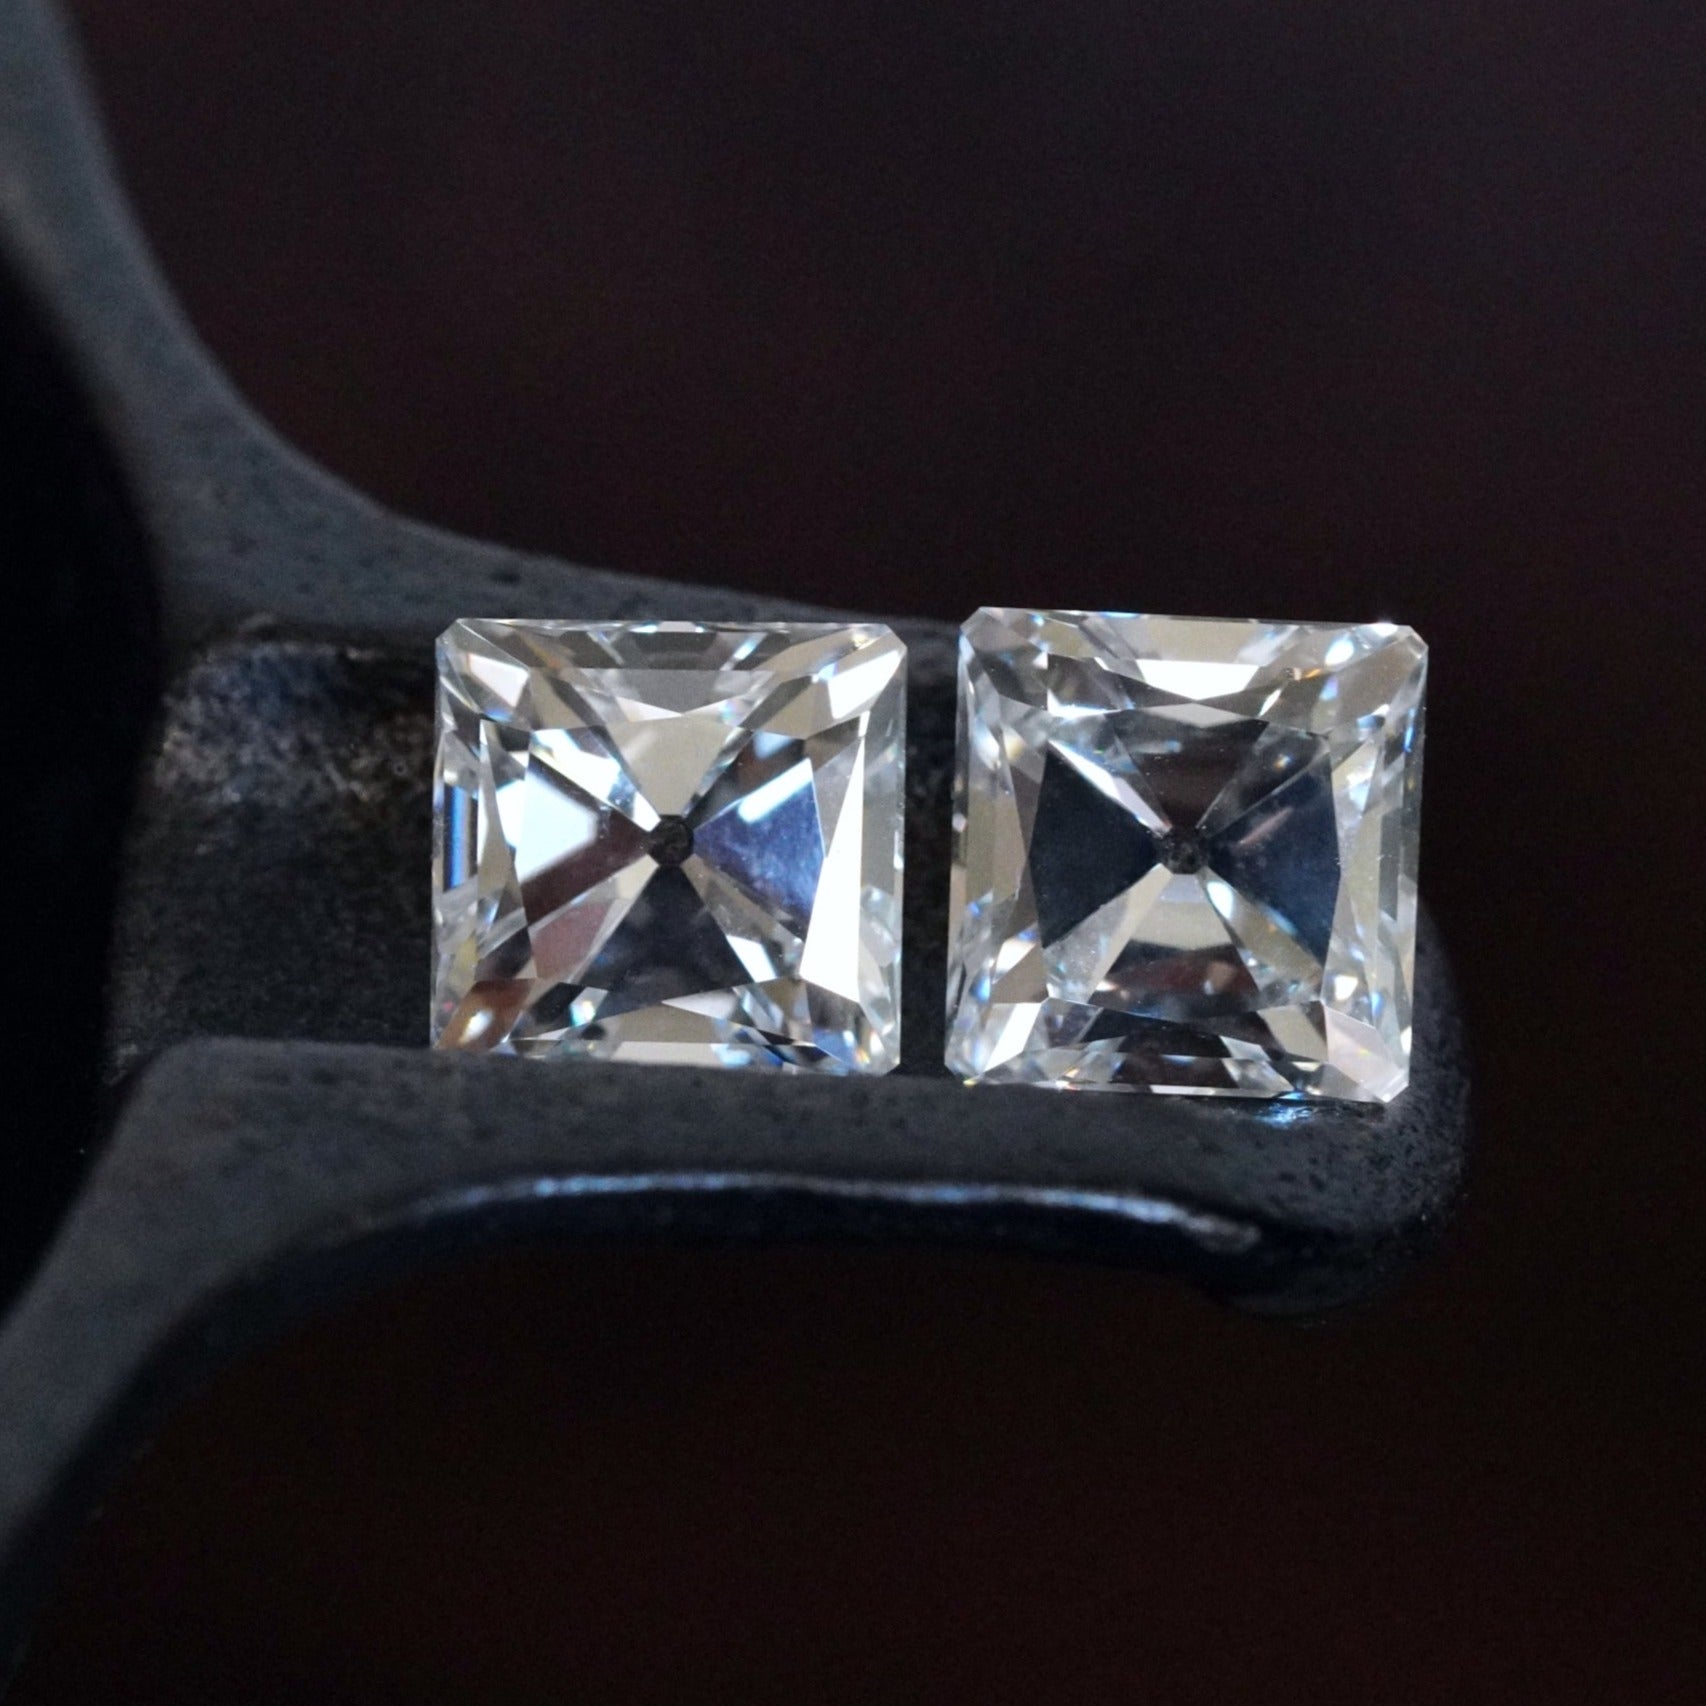 Pair of French Cut Diamonds, 3.11 cts each